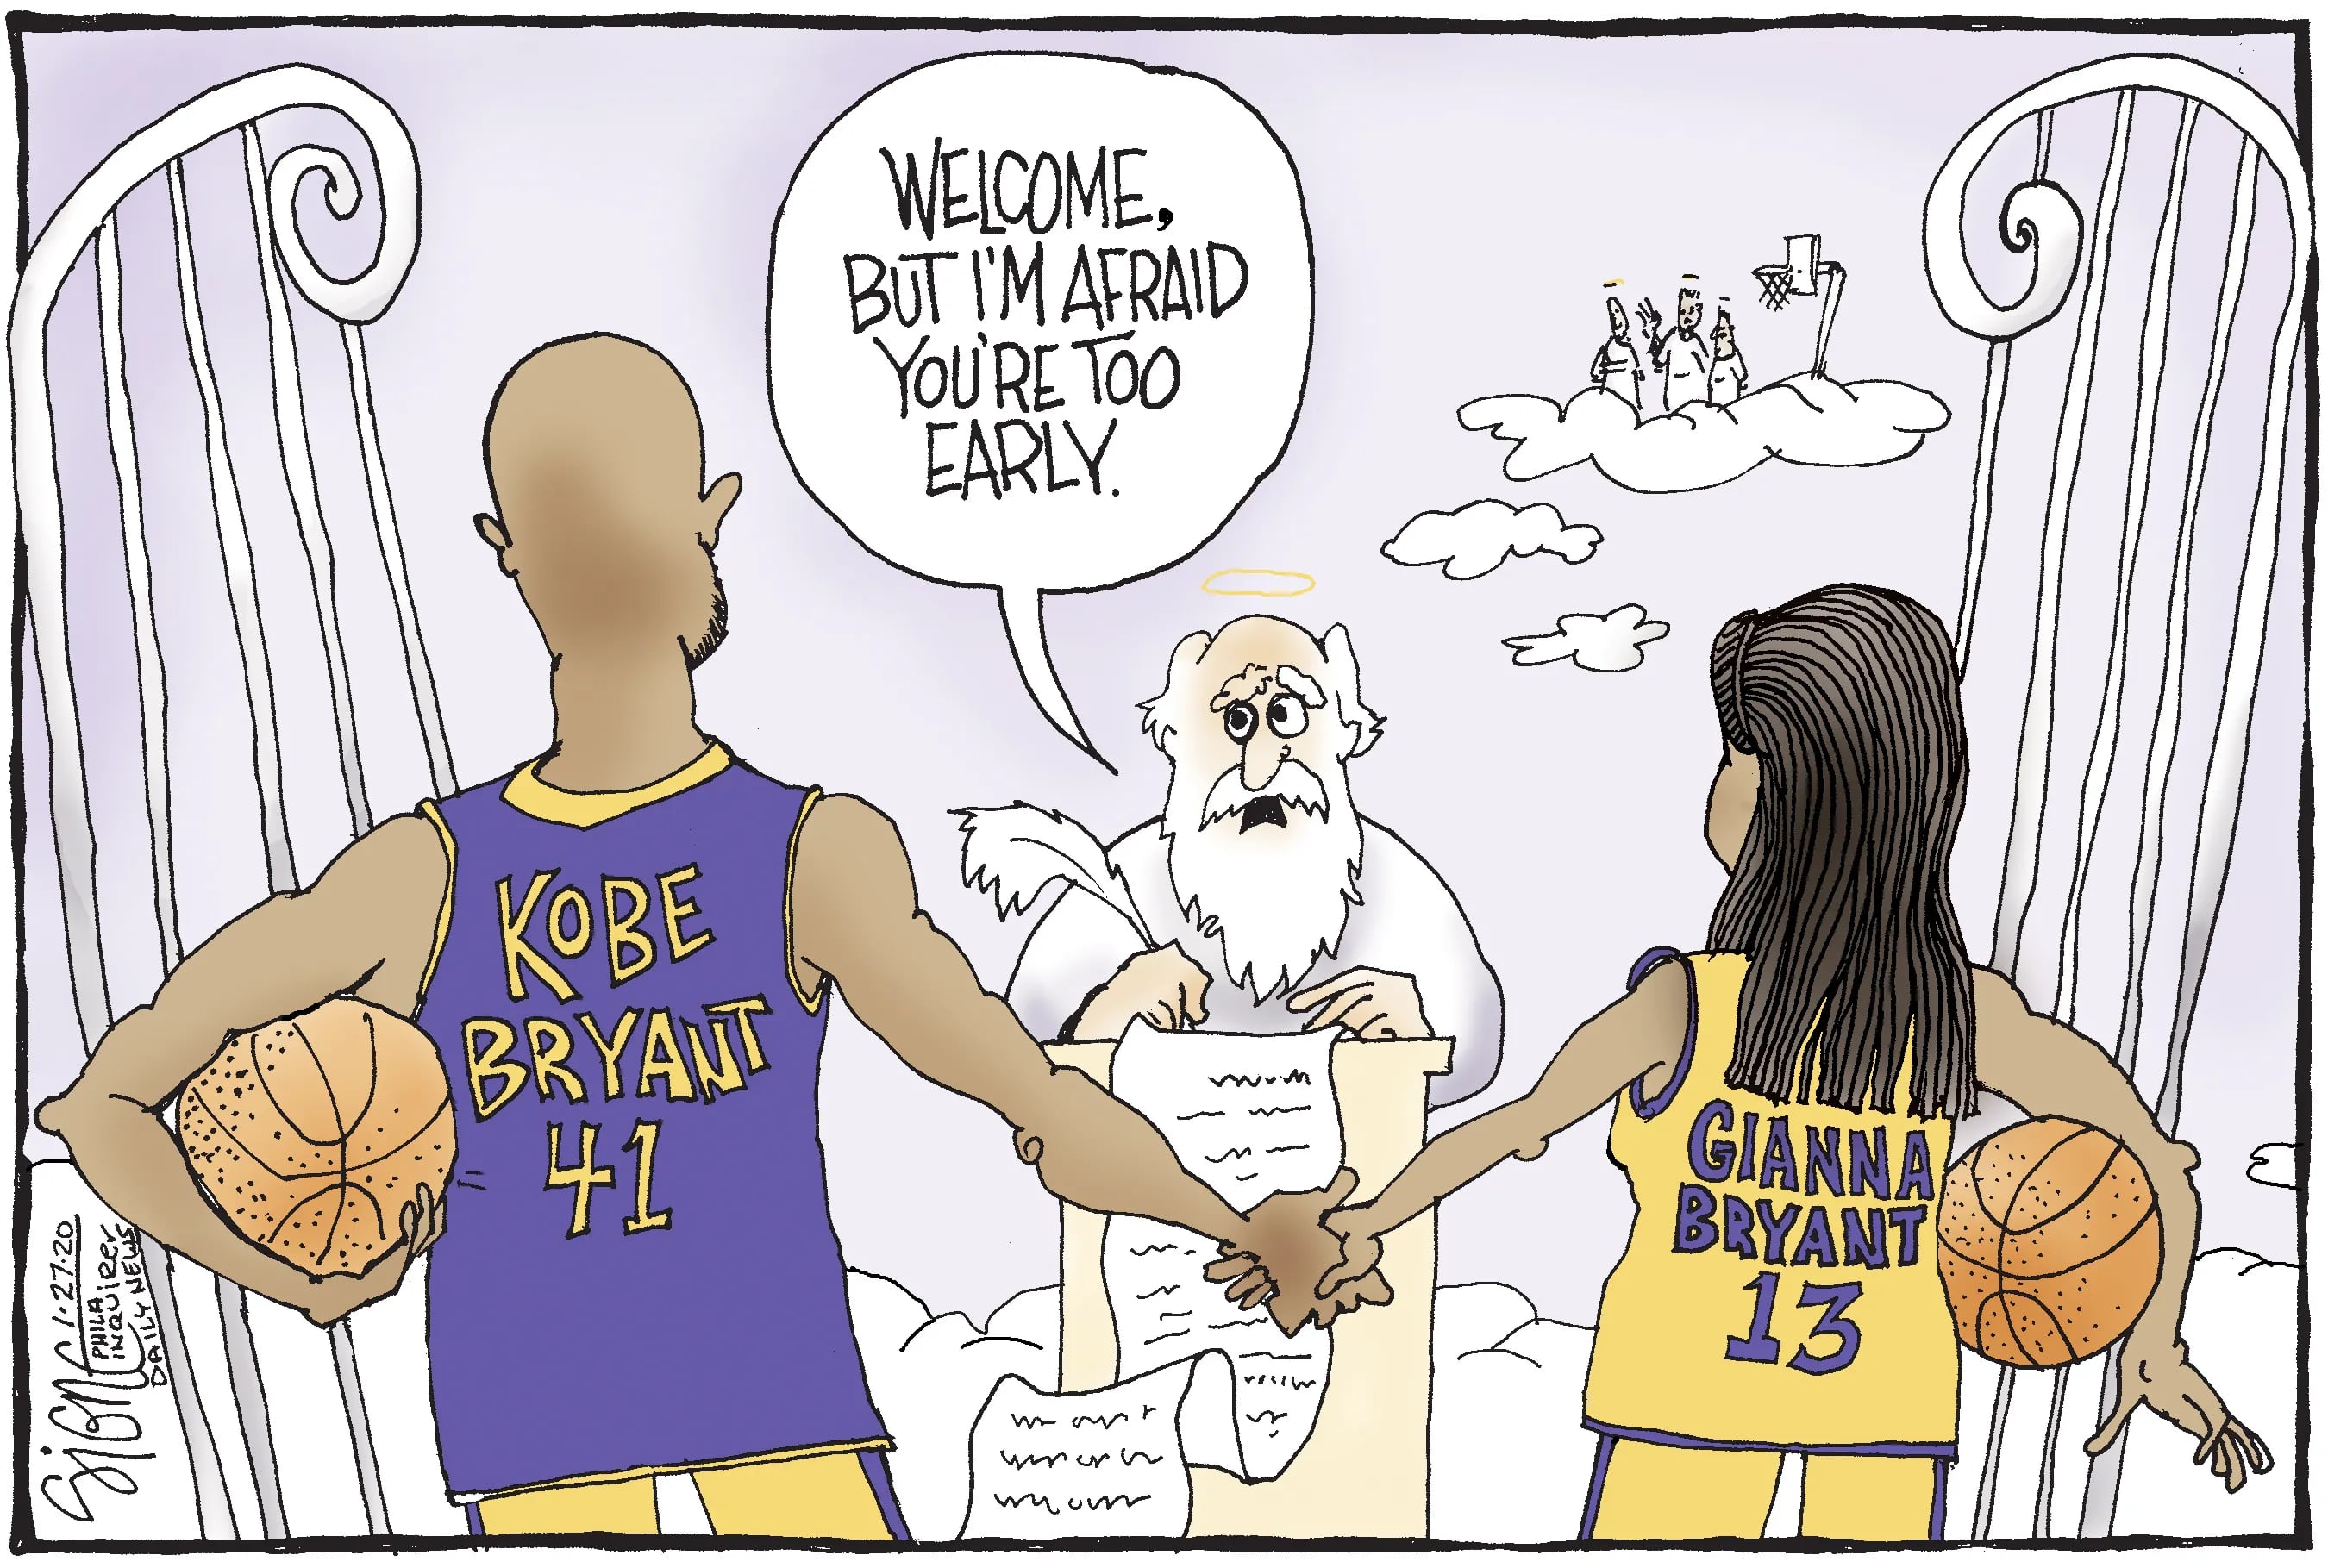 Kobe Bryant helicopter crash death chillingly predicted by cartoon four  years ago - Mirror Online